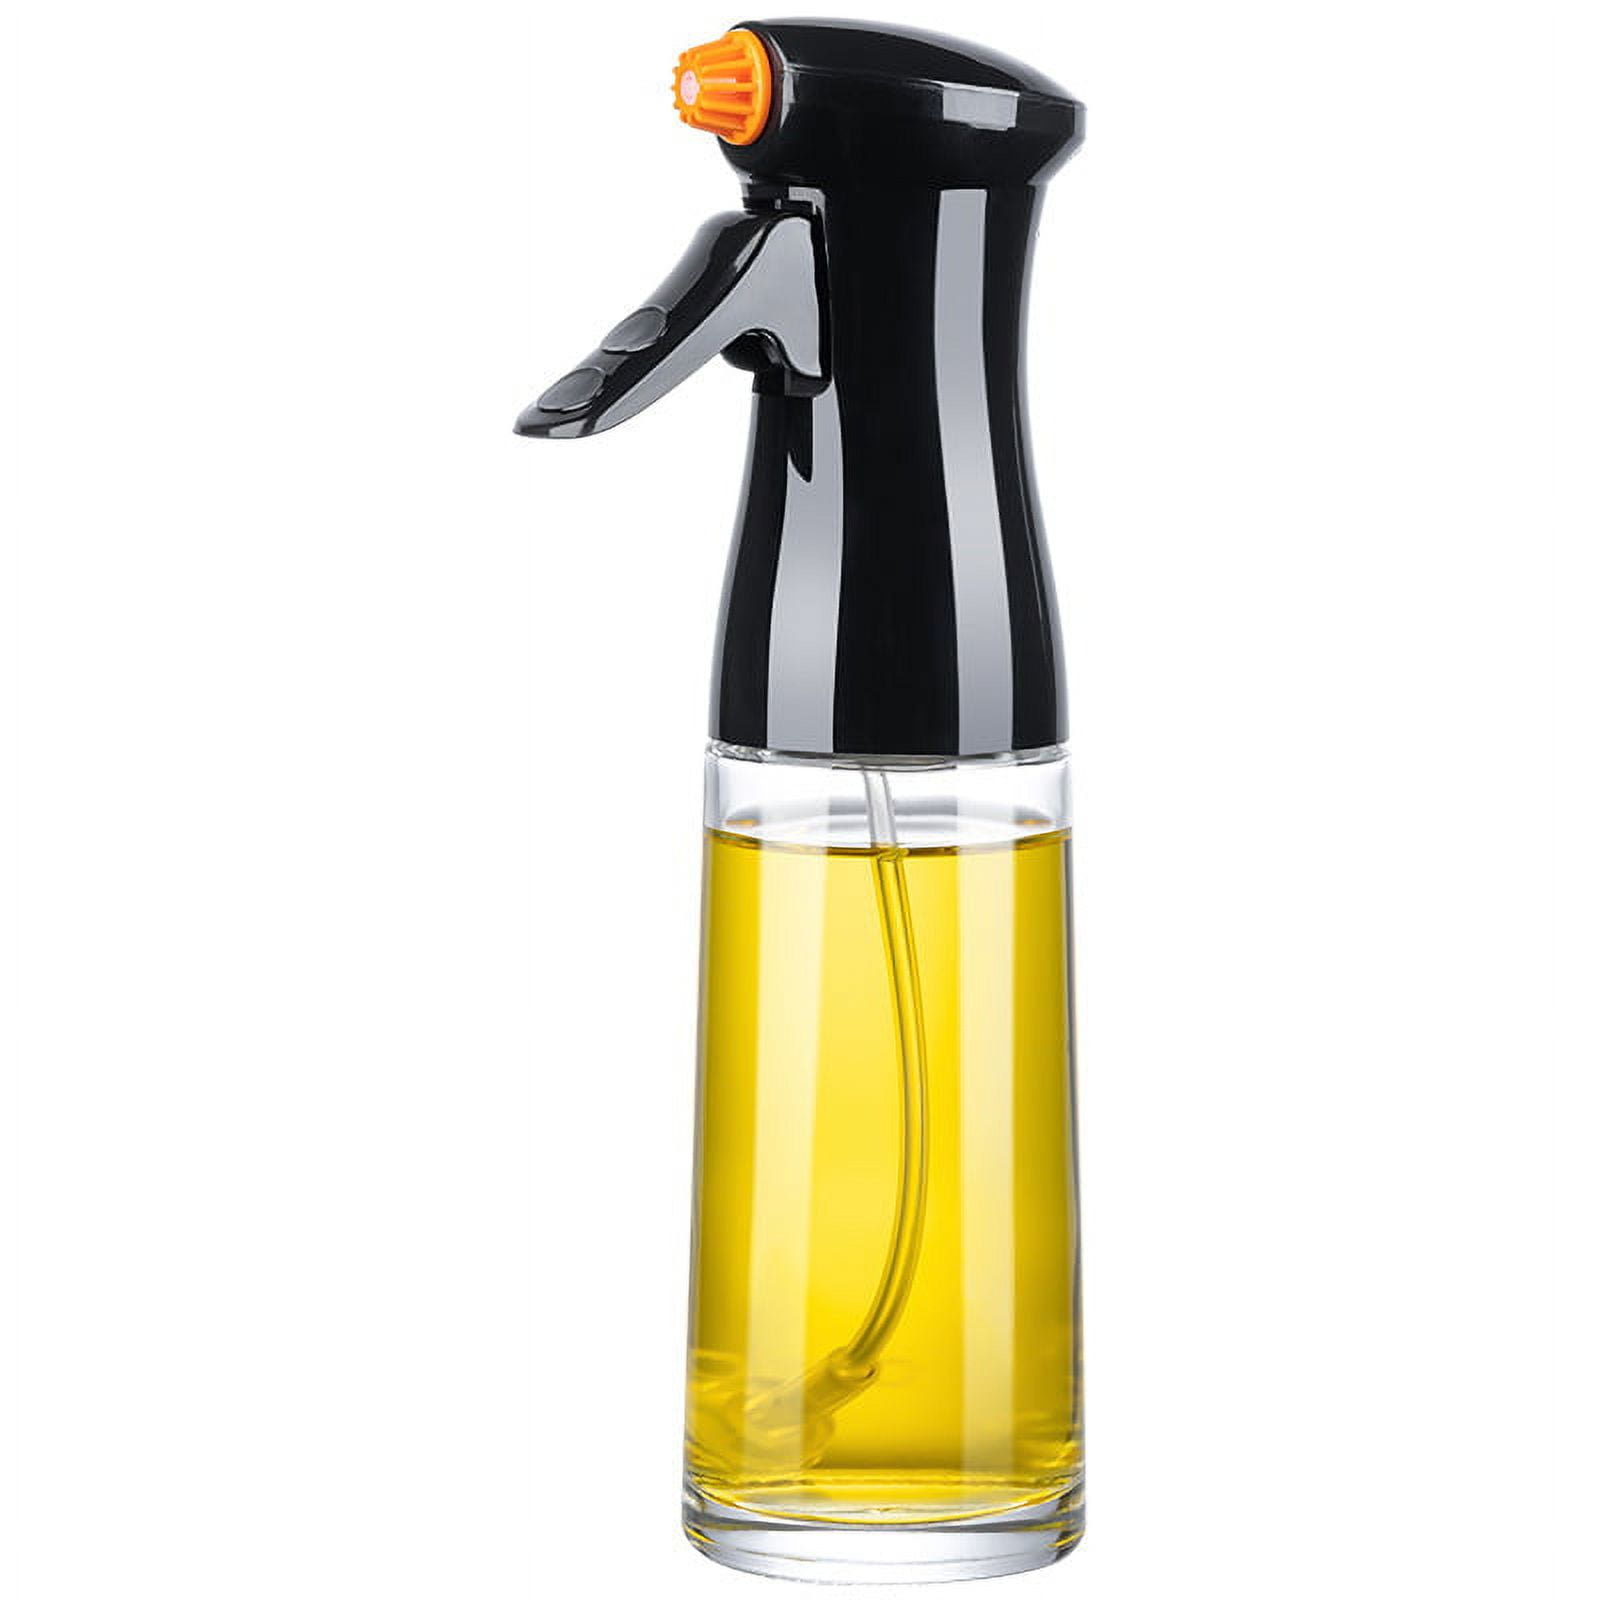 Flairosol Olivia Oil Sprayer review: A kitchen writer's thoughts